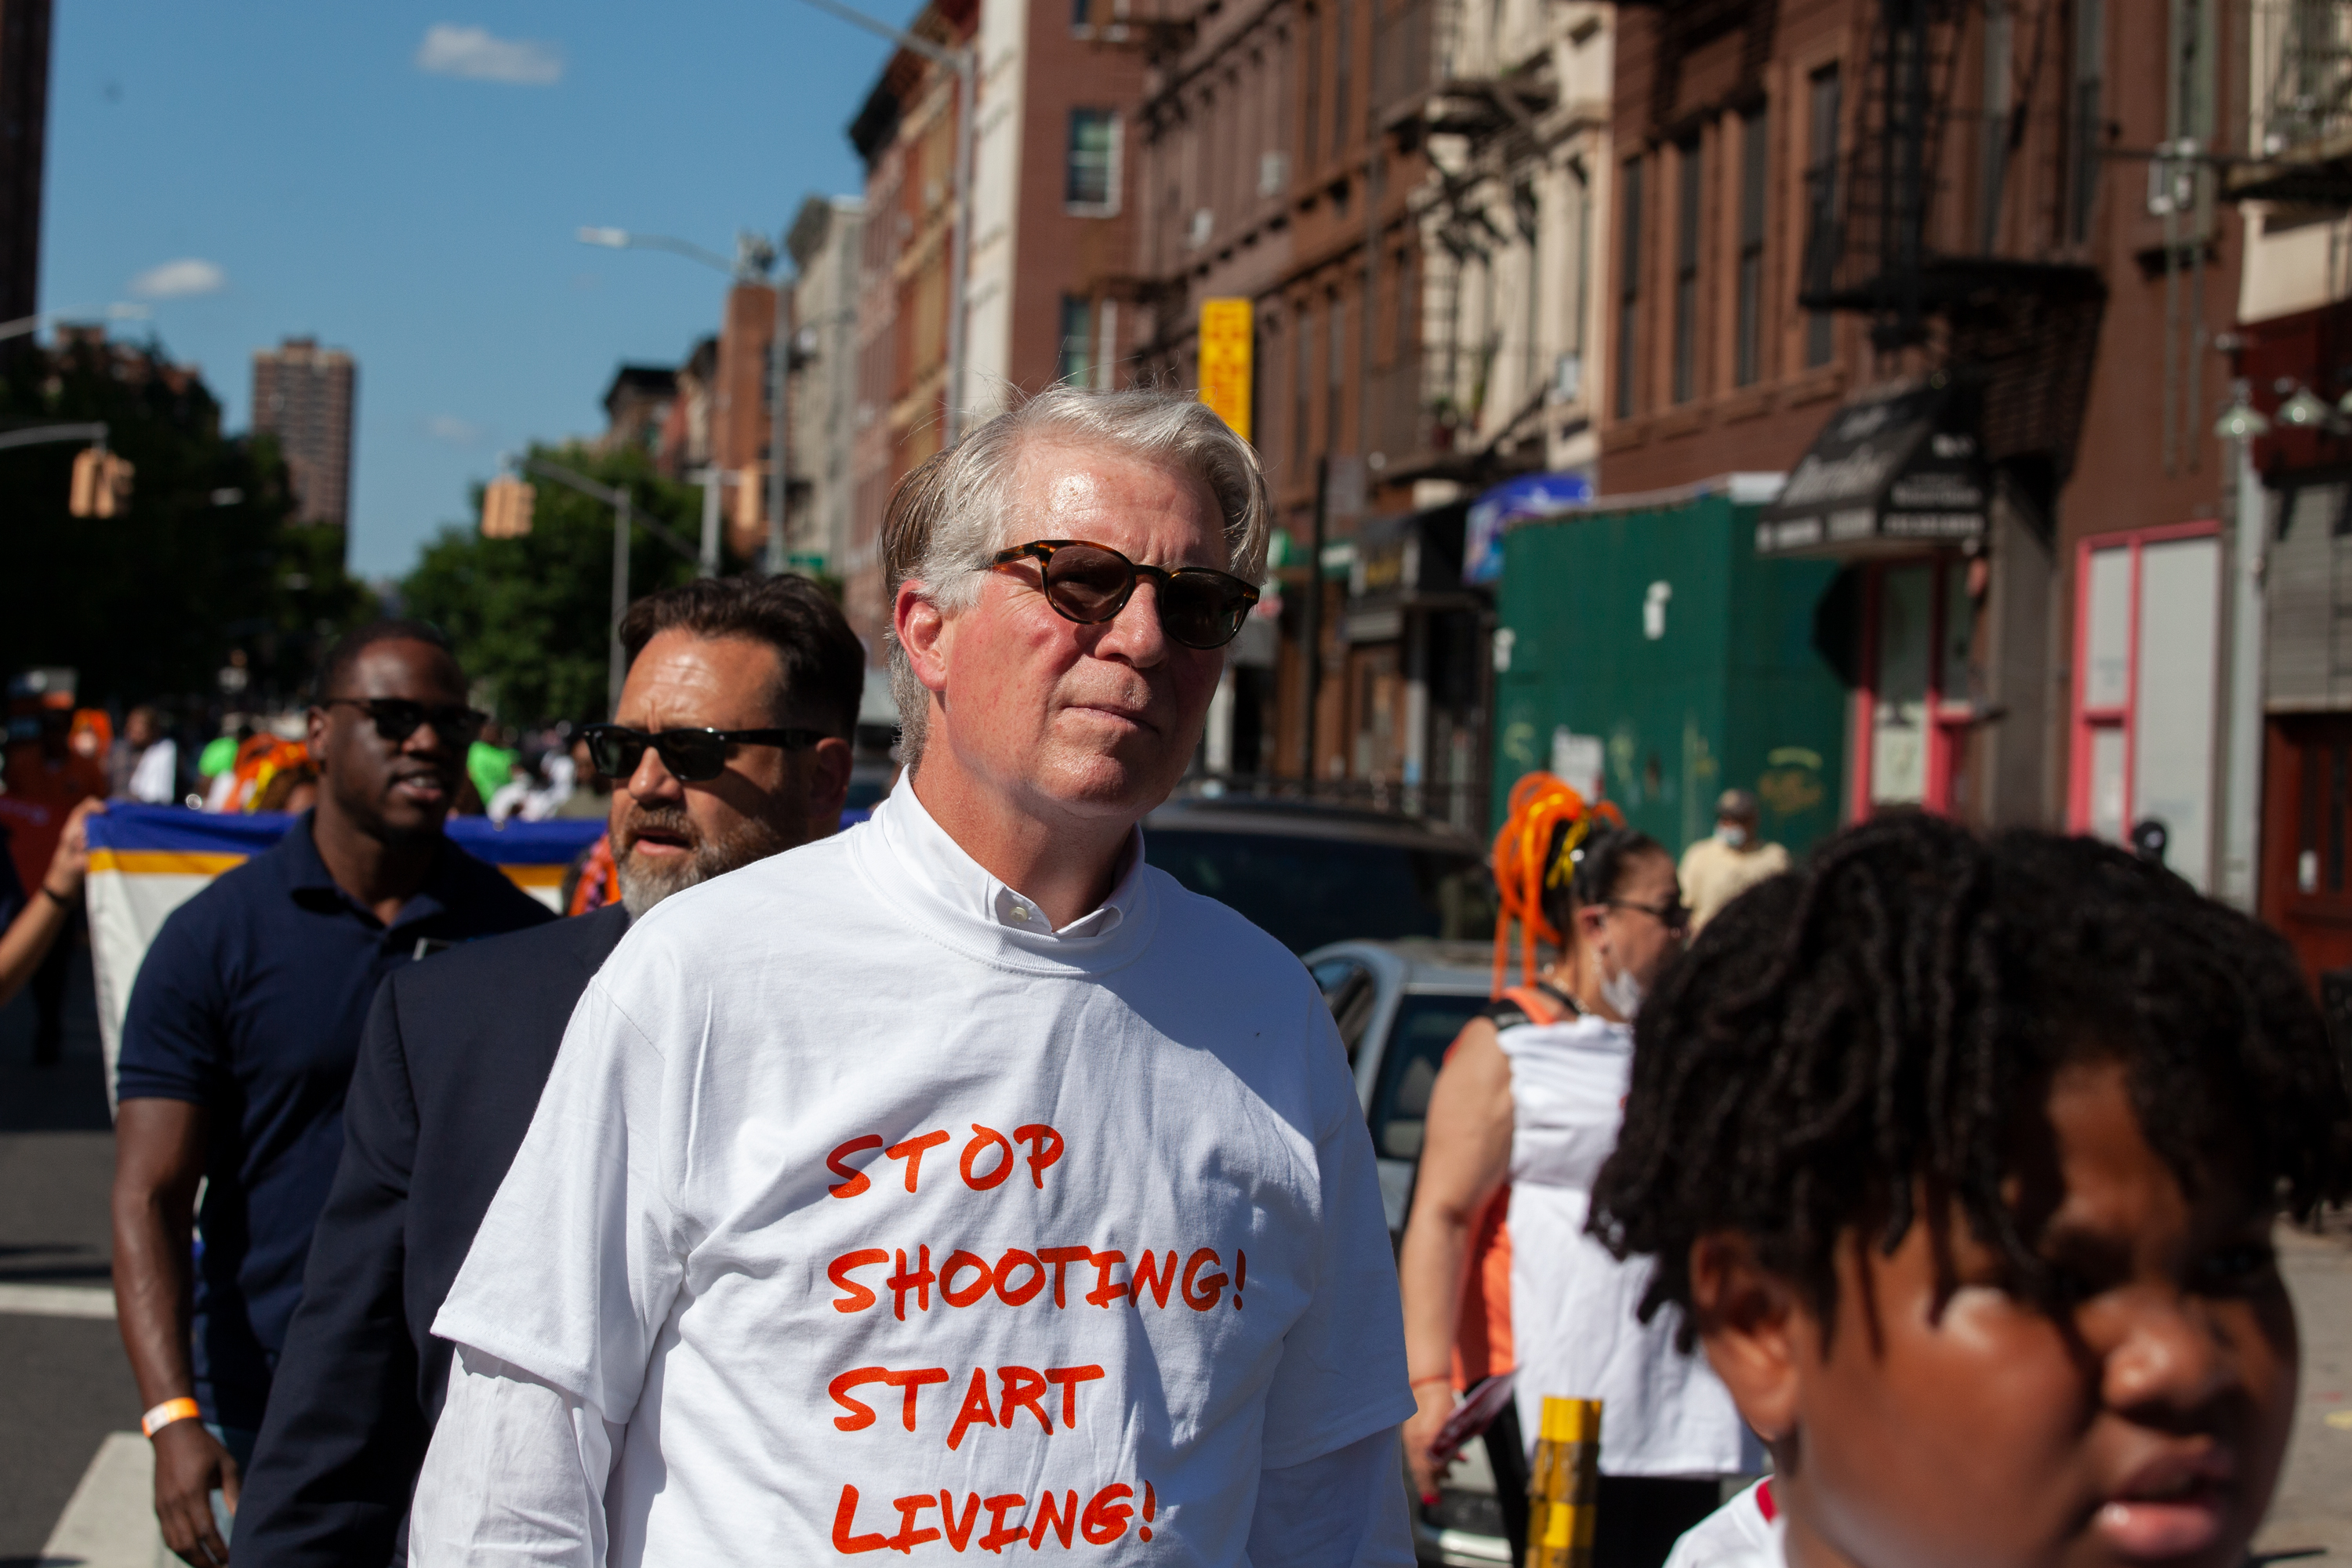 Manhattan District Attorney Cyrus Vance takes part in an anti-violence march through East Harlem, June 17, 2021.